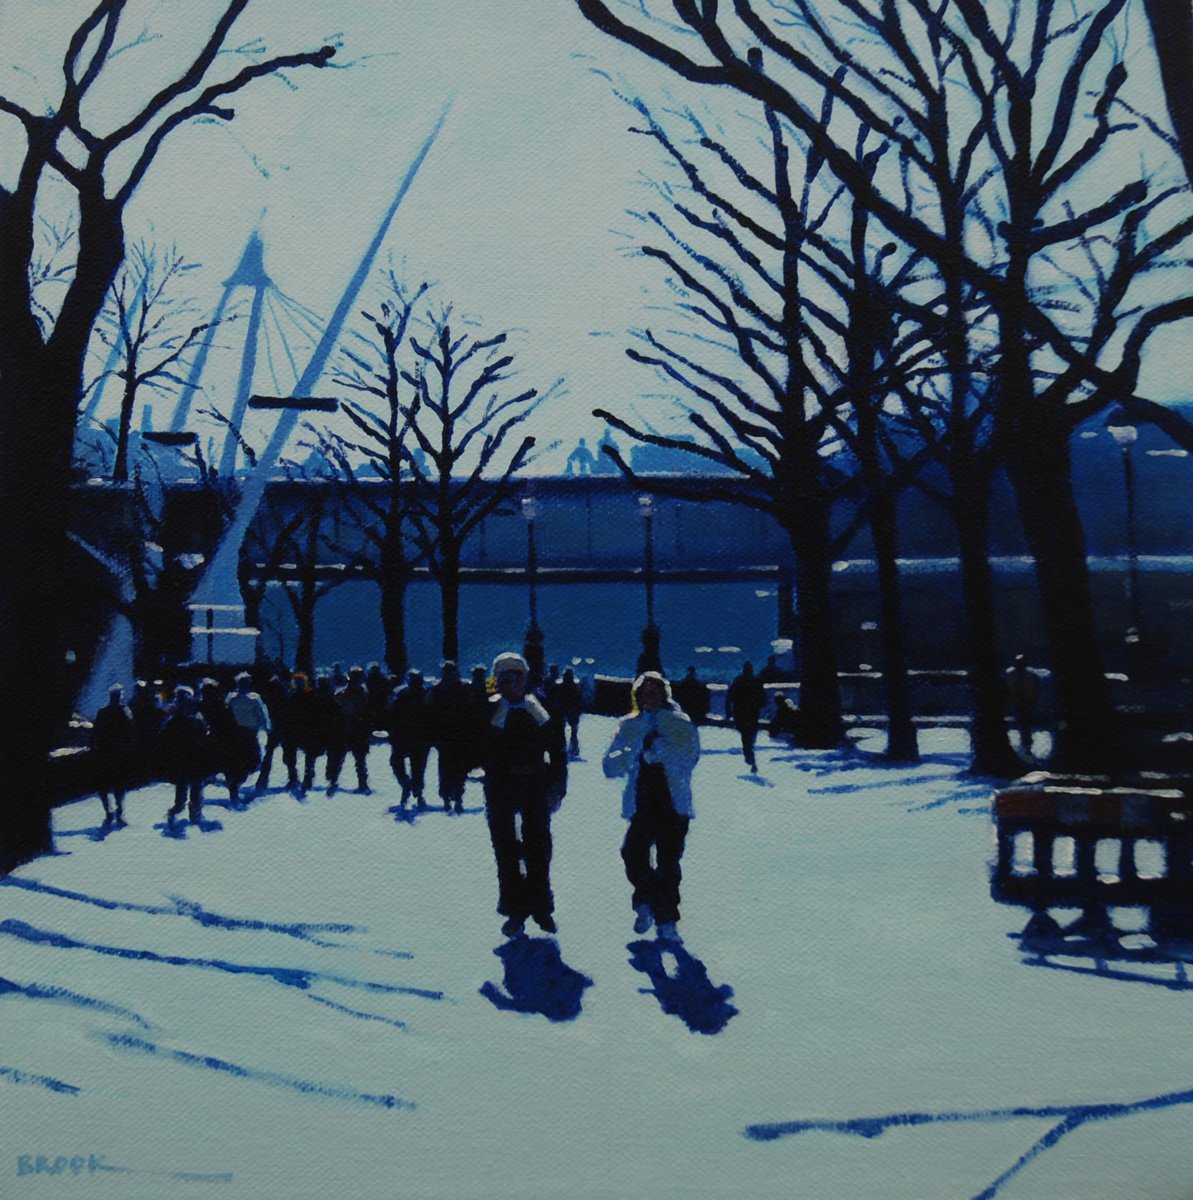 Winter on the Southbank. by Stephen Brook